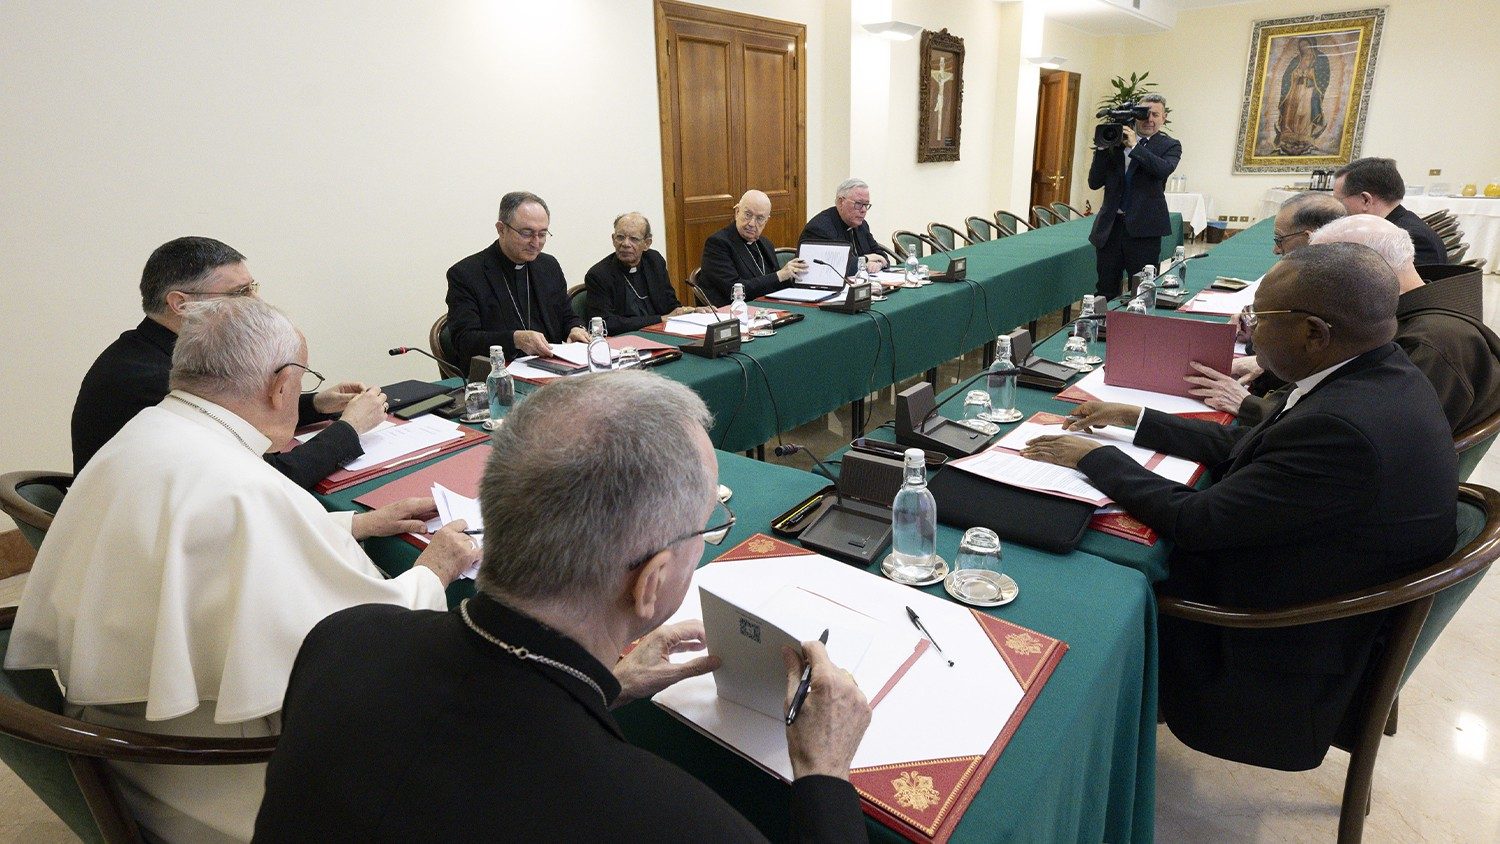 The Council of Cardinals plans to hold its next meeting in April